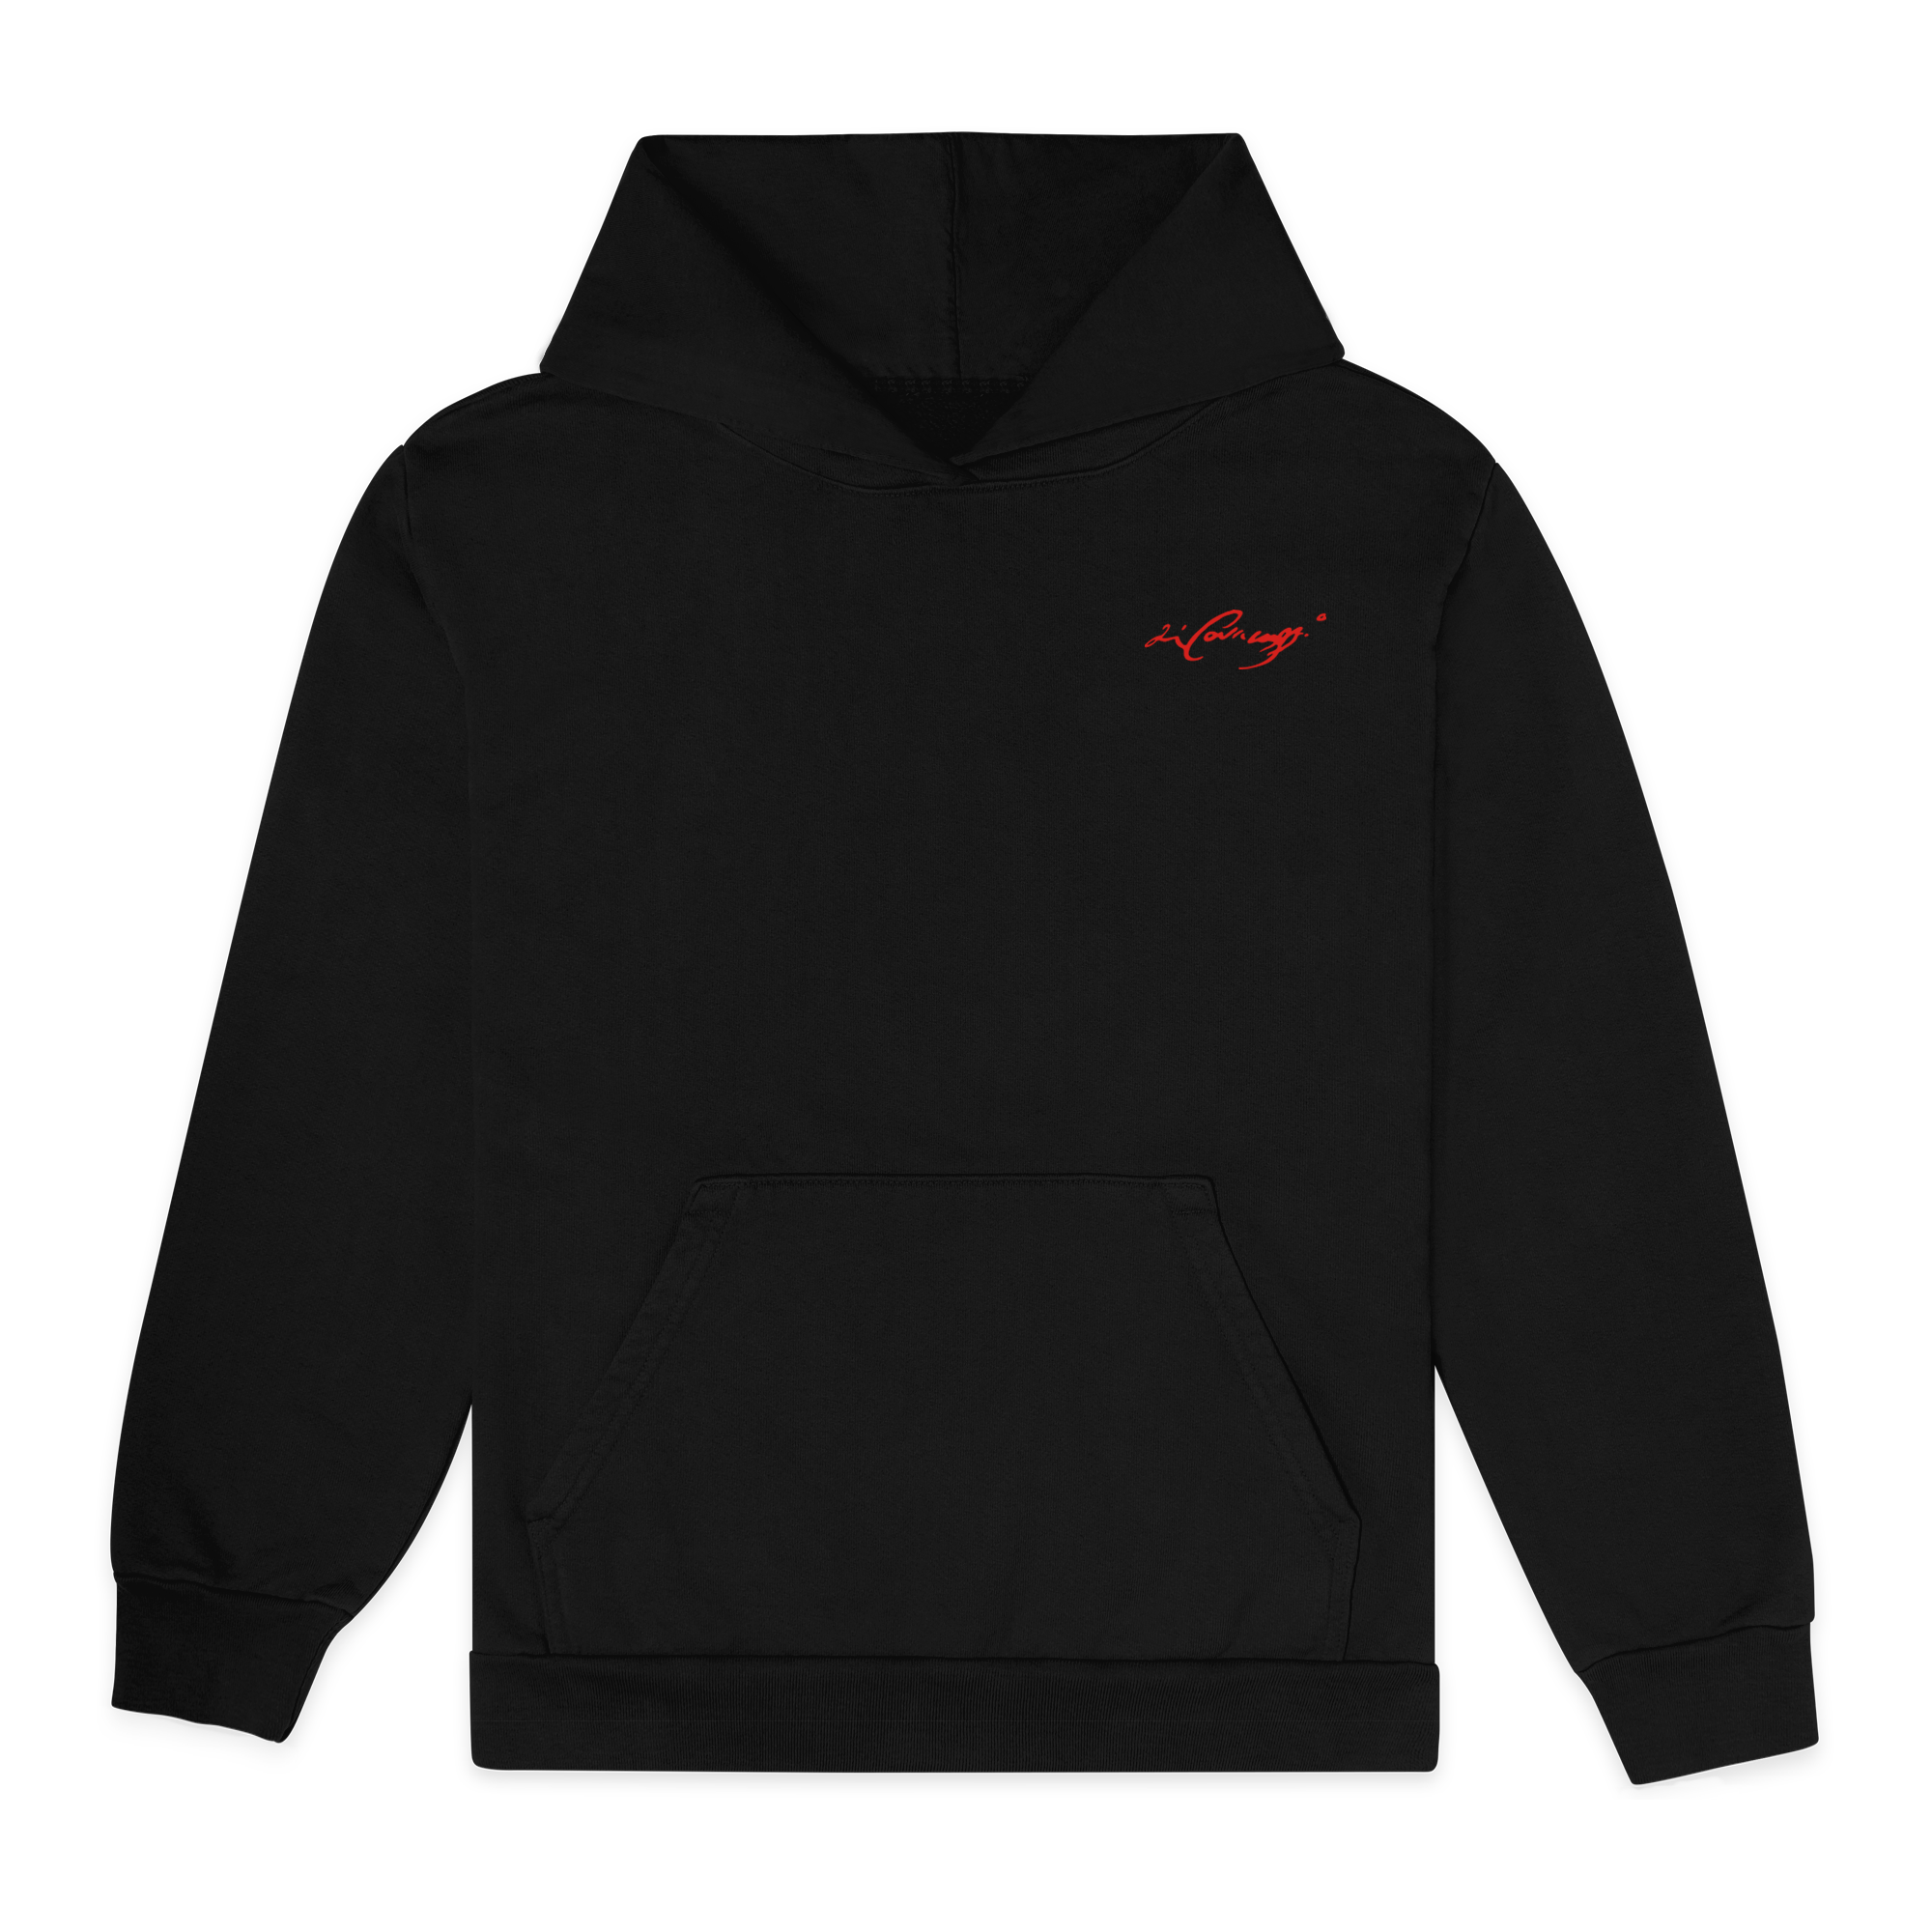 TOULOUSE HOODIE